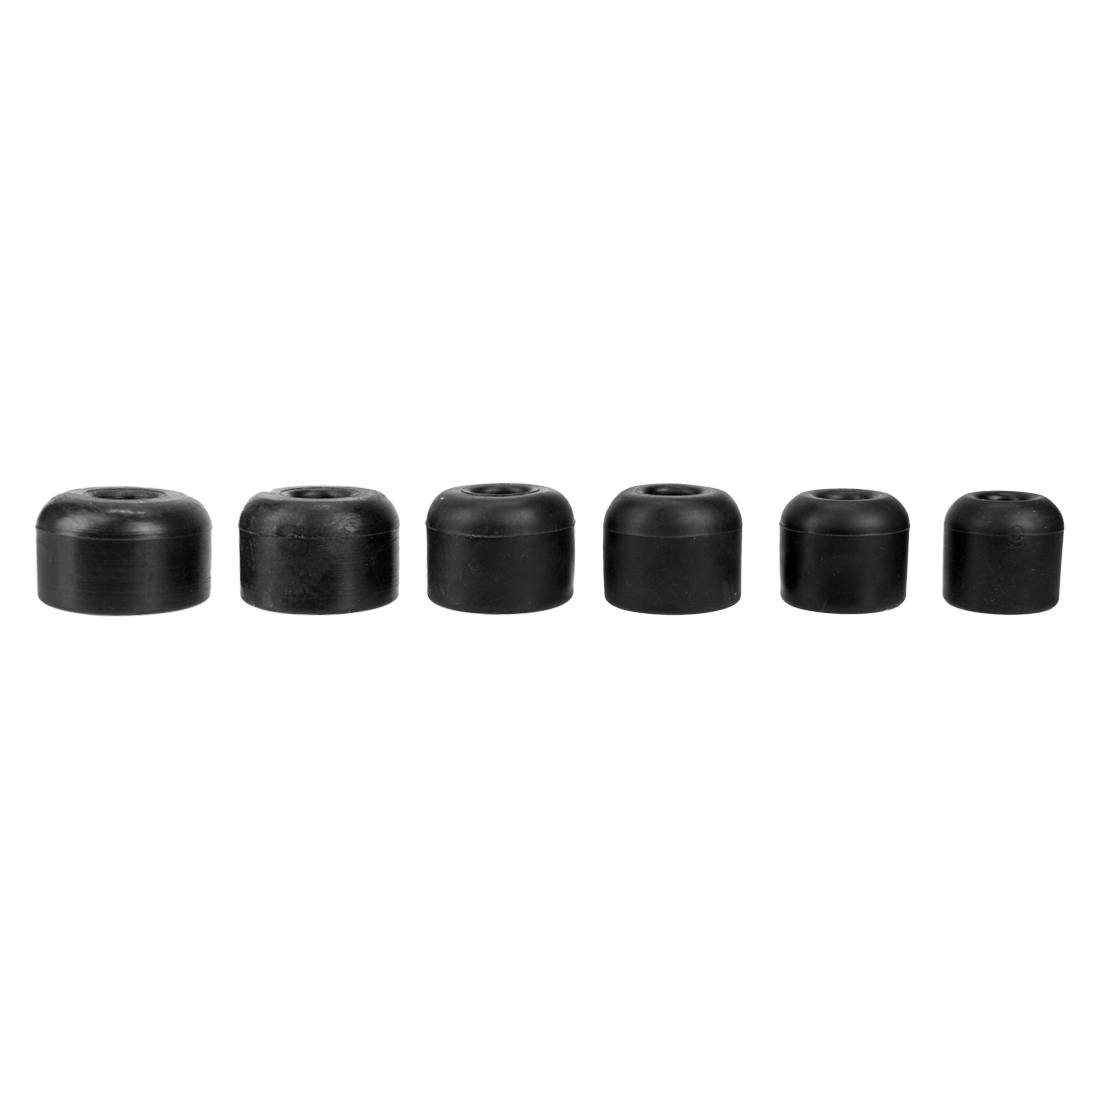 XERO Base Cap - For Plus and Glue-On Style Poles All Sizes View